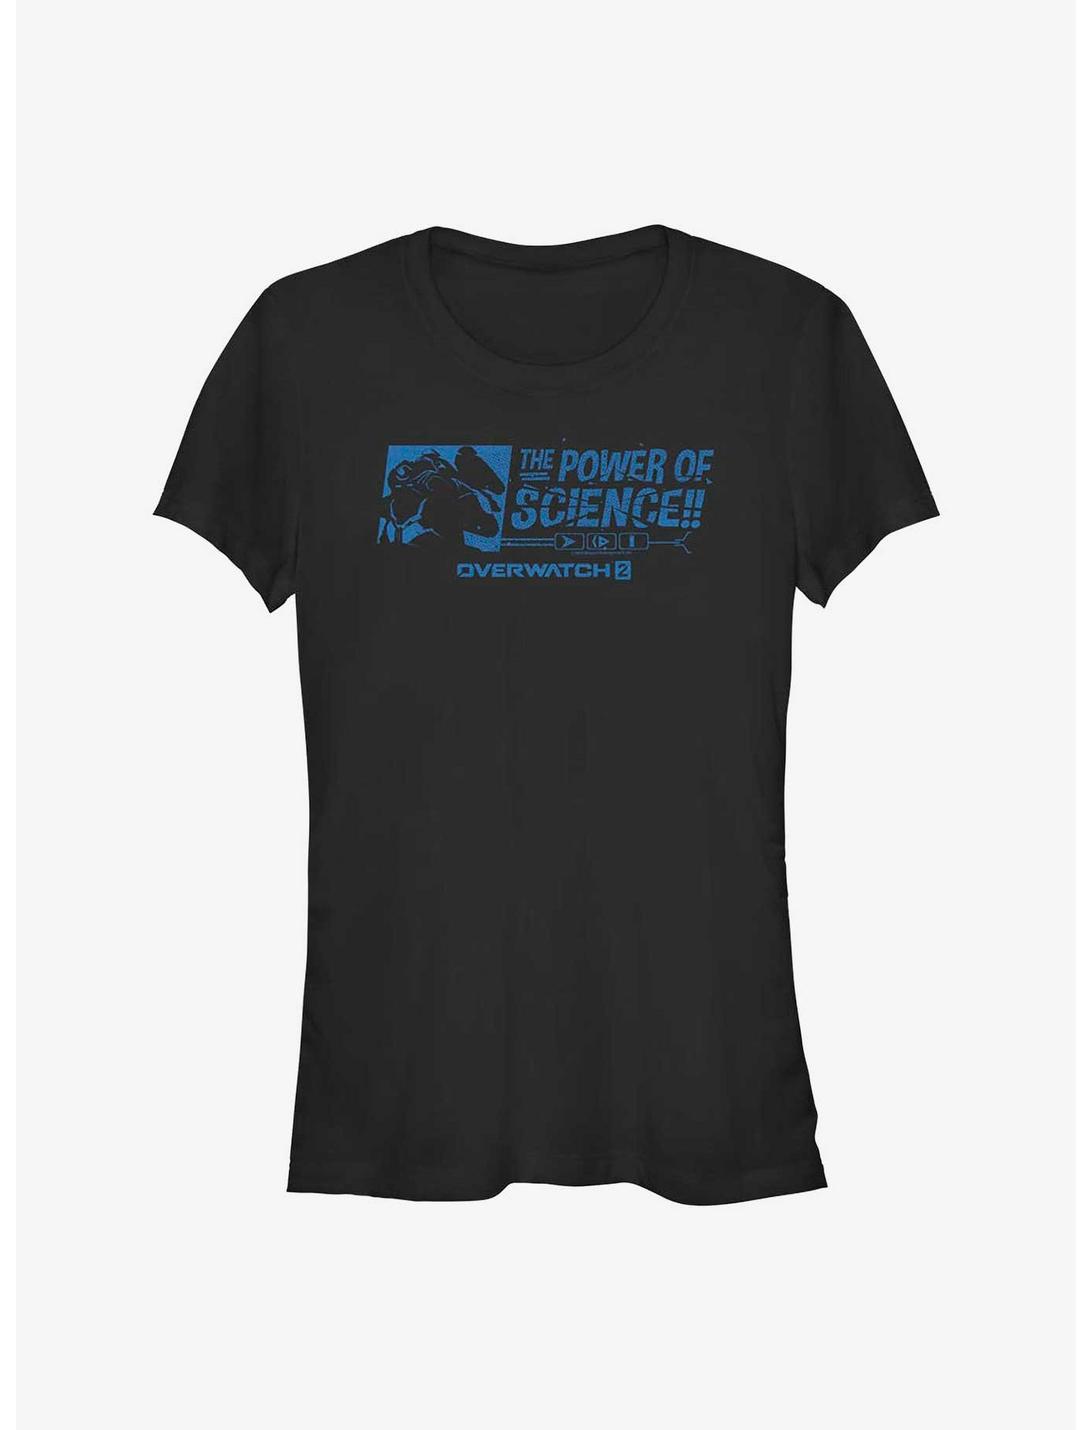 Overwatch 2 Winston The Power of Science Girls T-Shirt, BLACK, hi-res